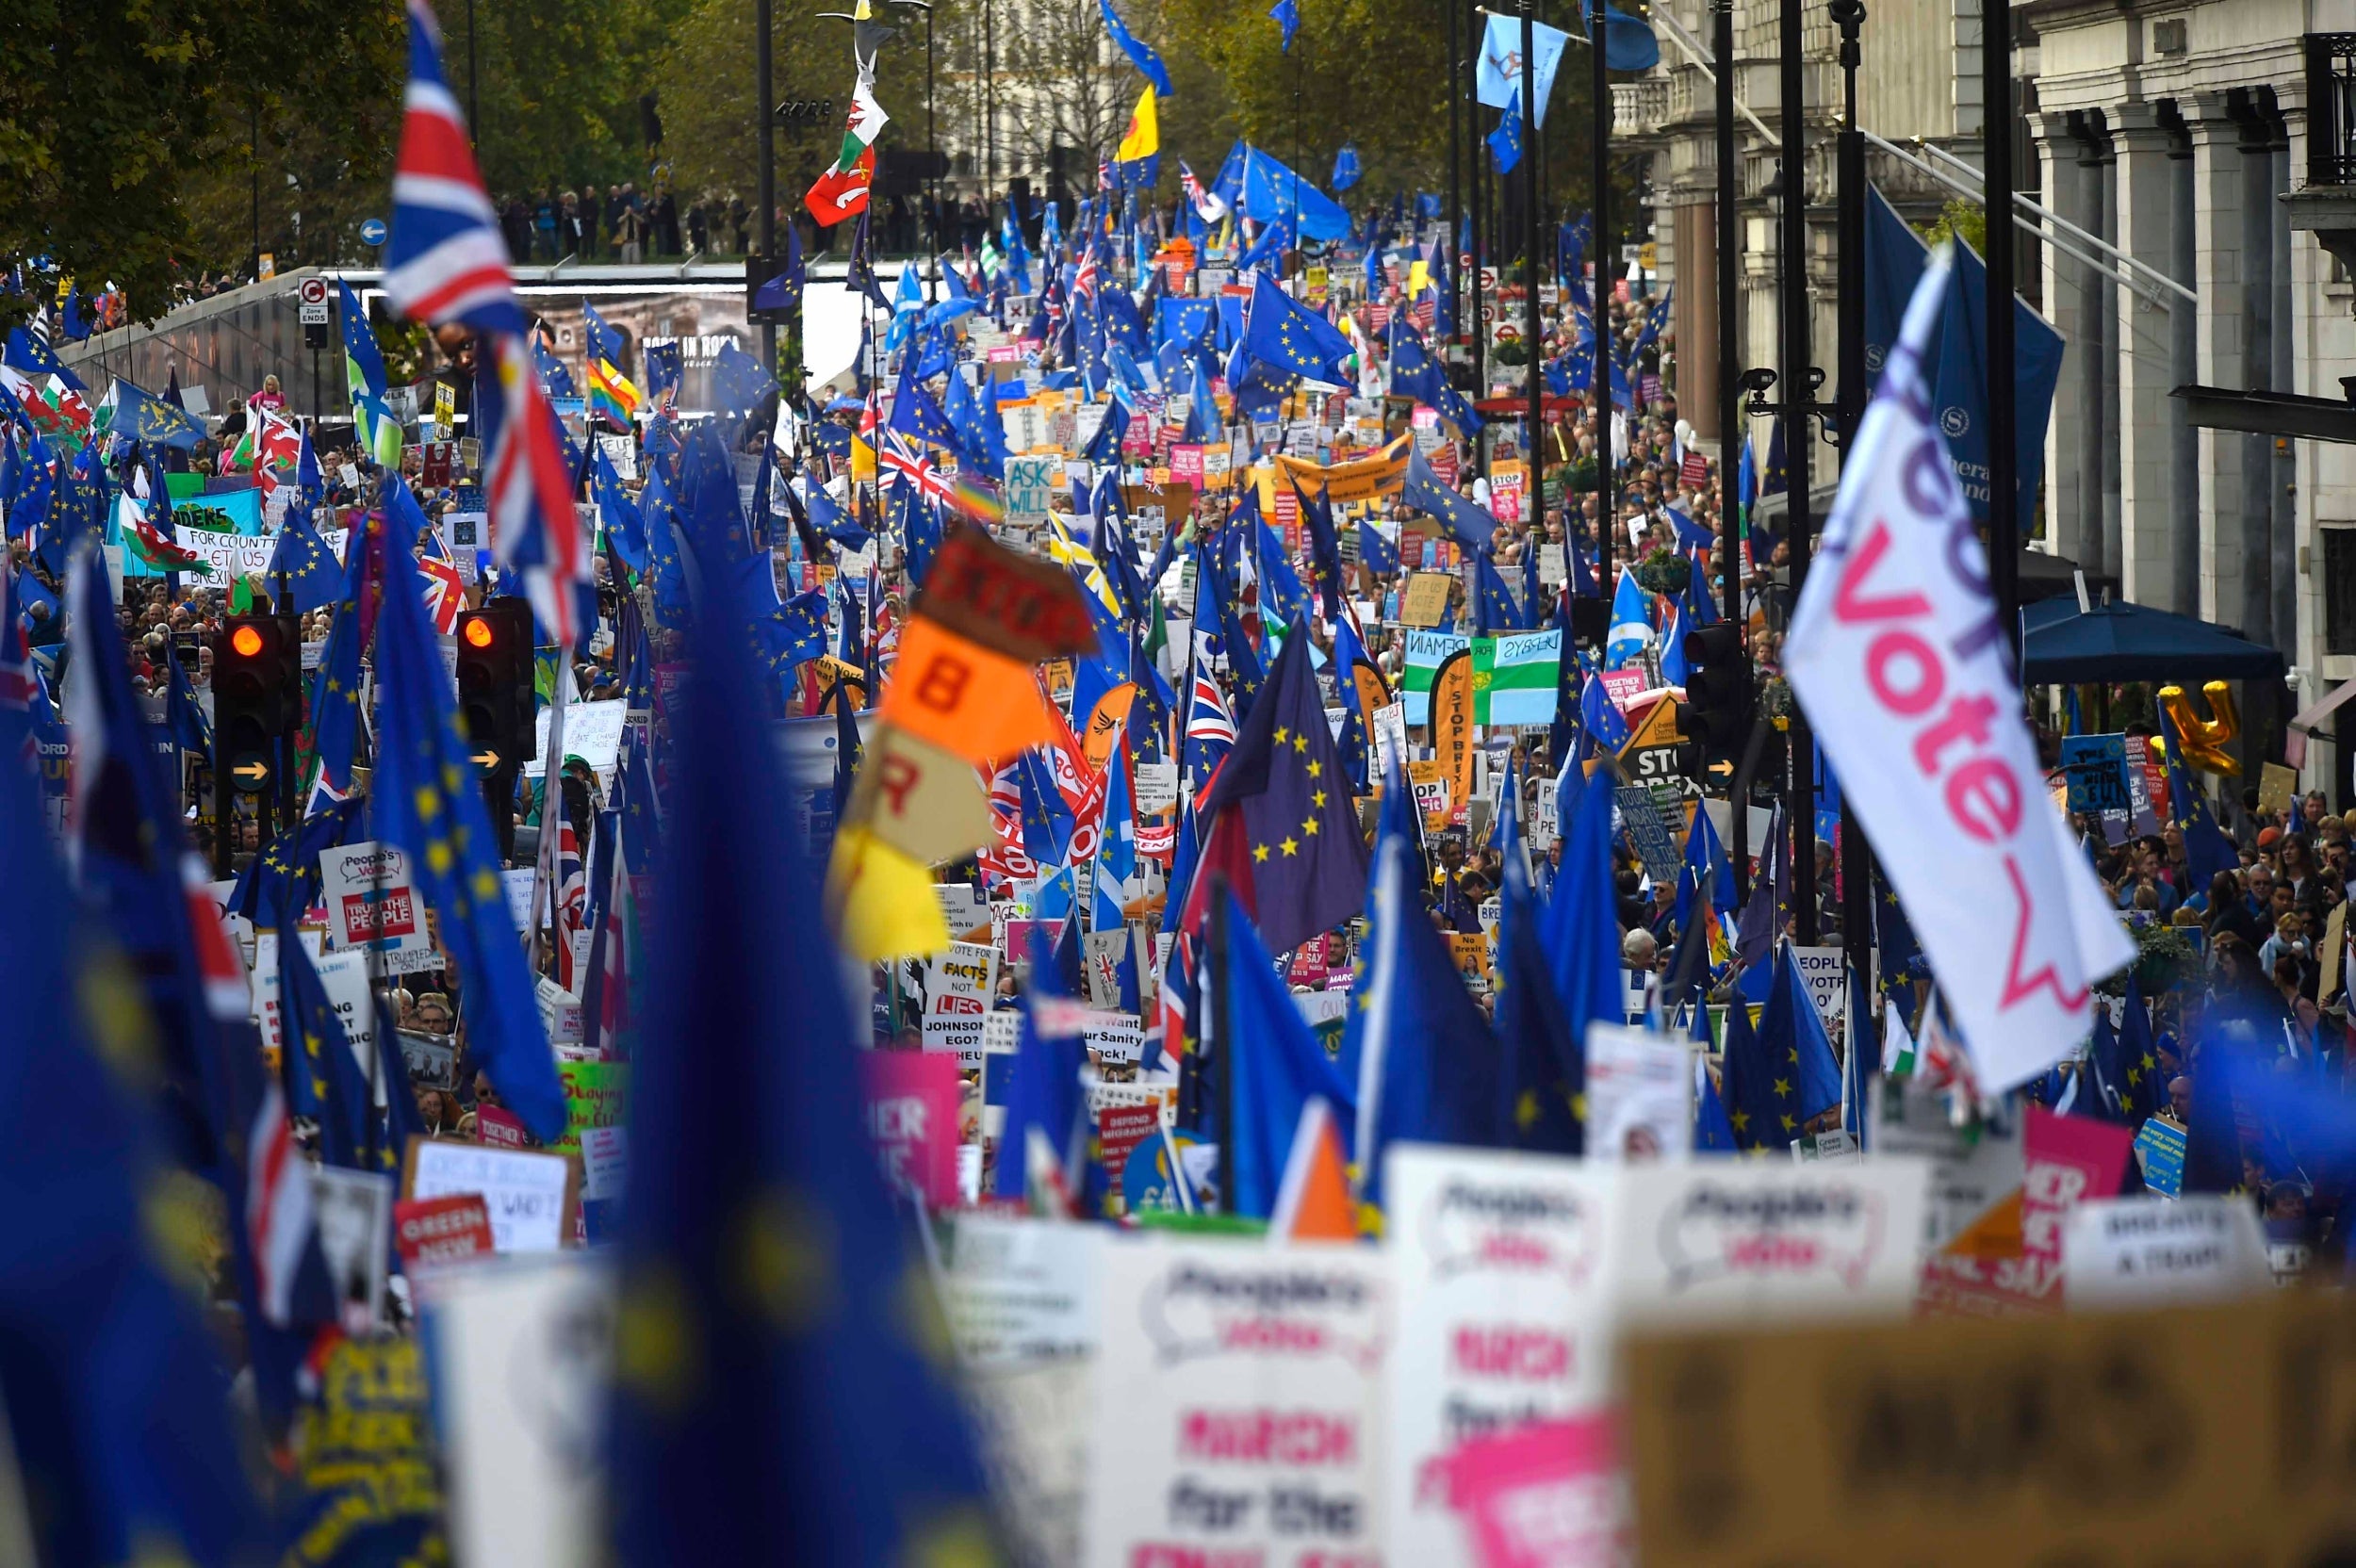 Protesters take to the streets on 19 October to demand a Final Say on Brexit